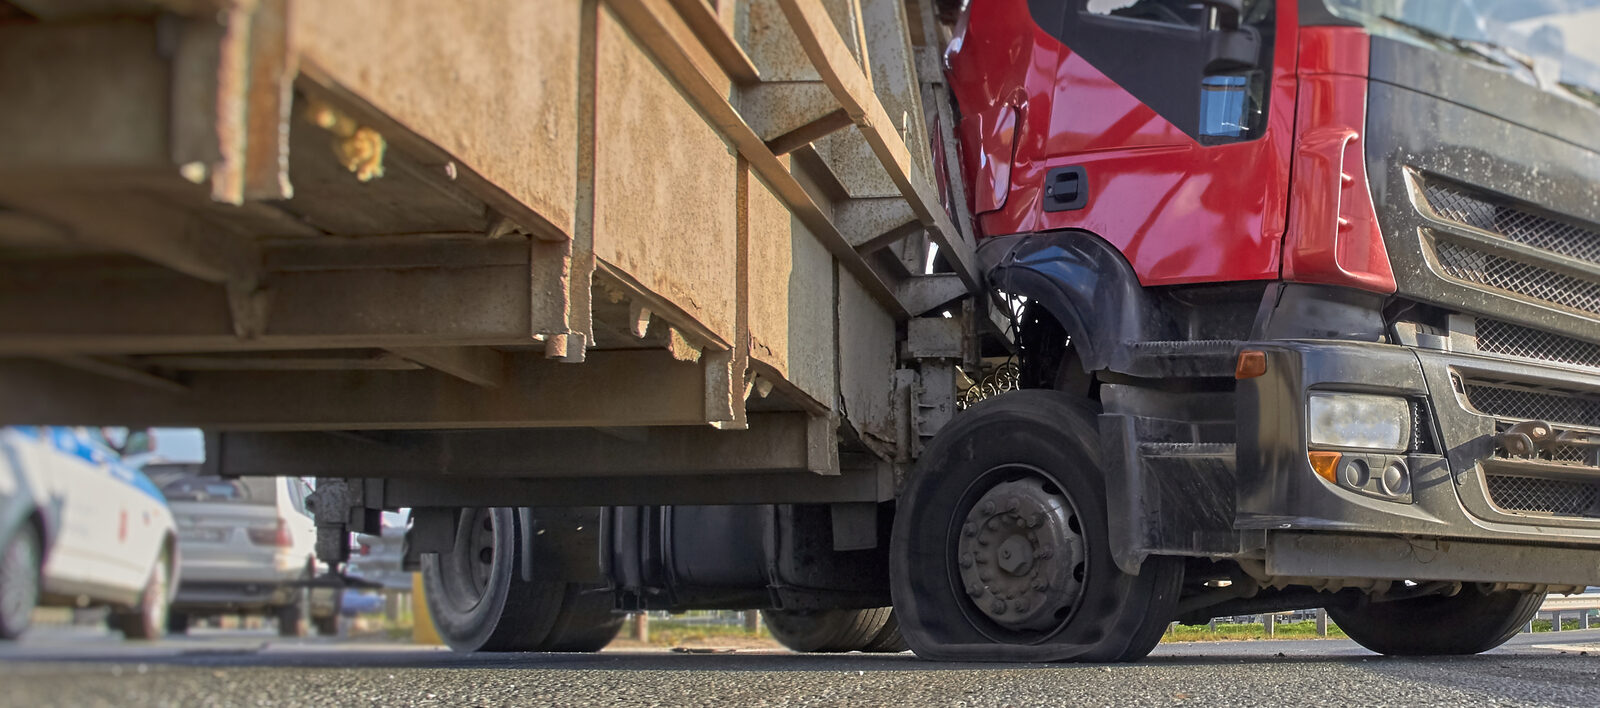 Truck Accident Law Firm for Illinois Cases | St. Clair County, IL Truck Crash Attorneys | Burger Law